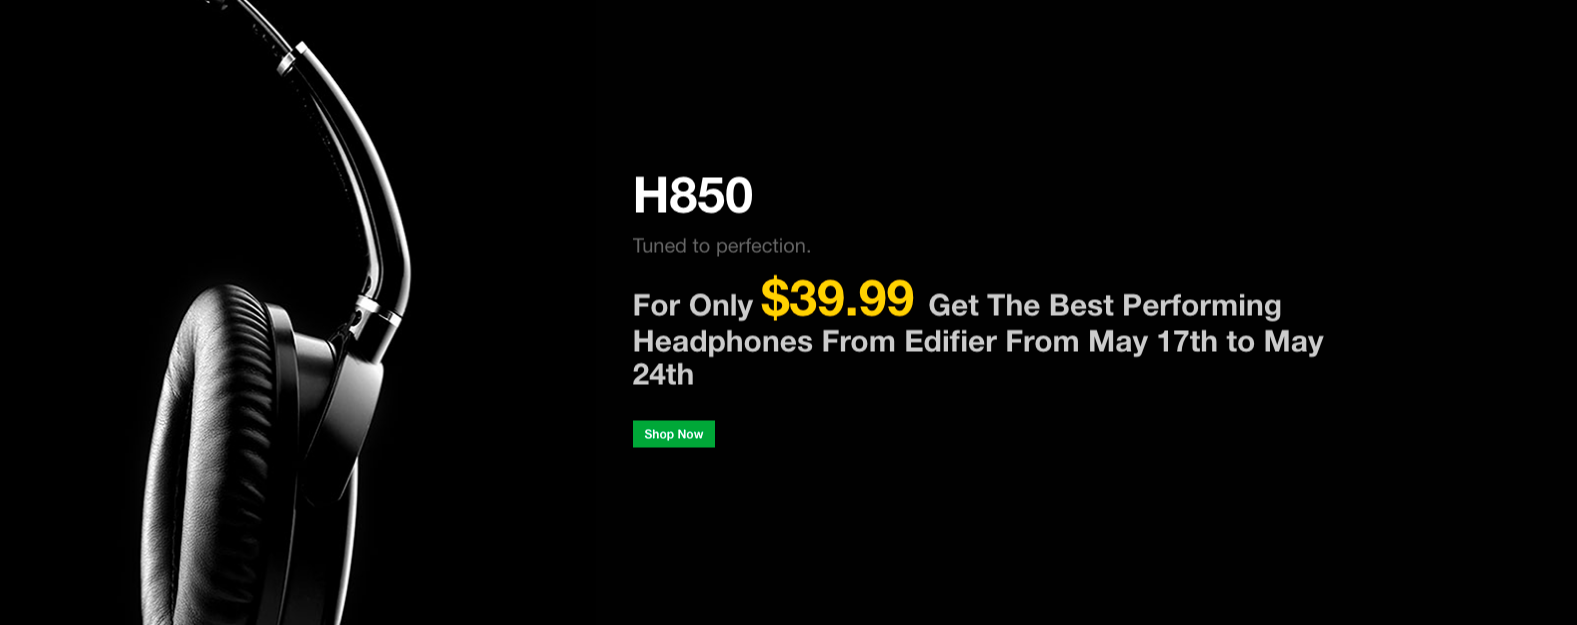 Get Your H850 Headphones For Only $39.99